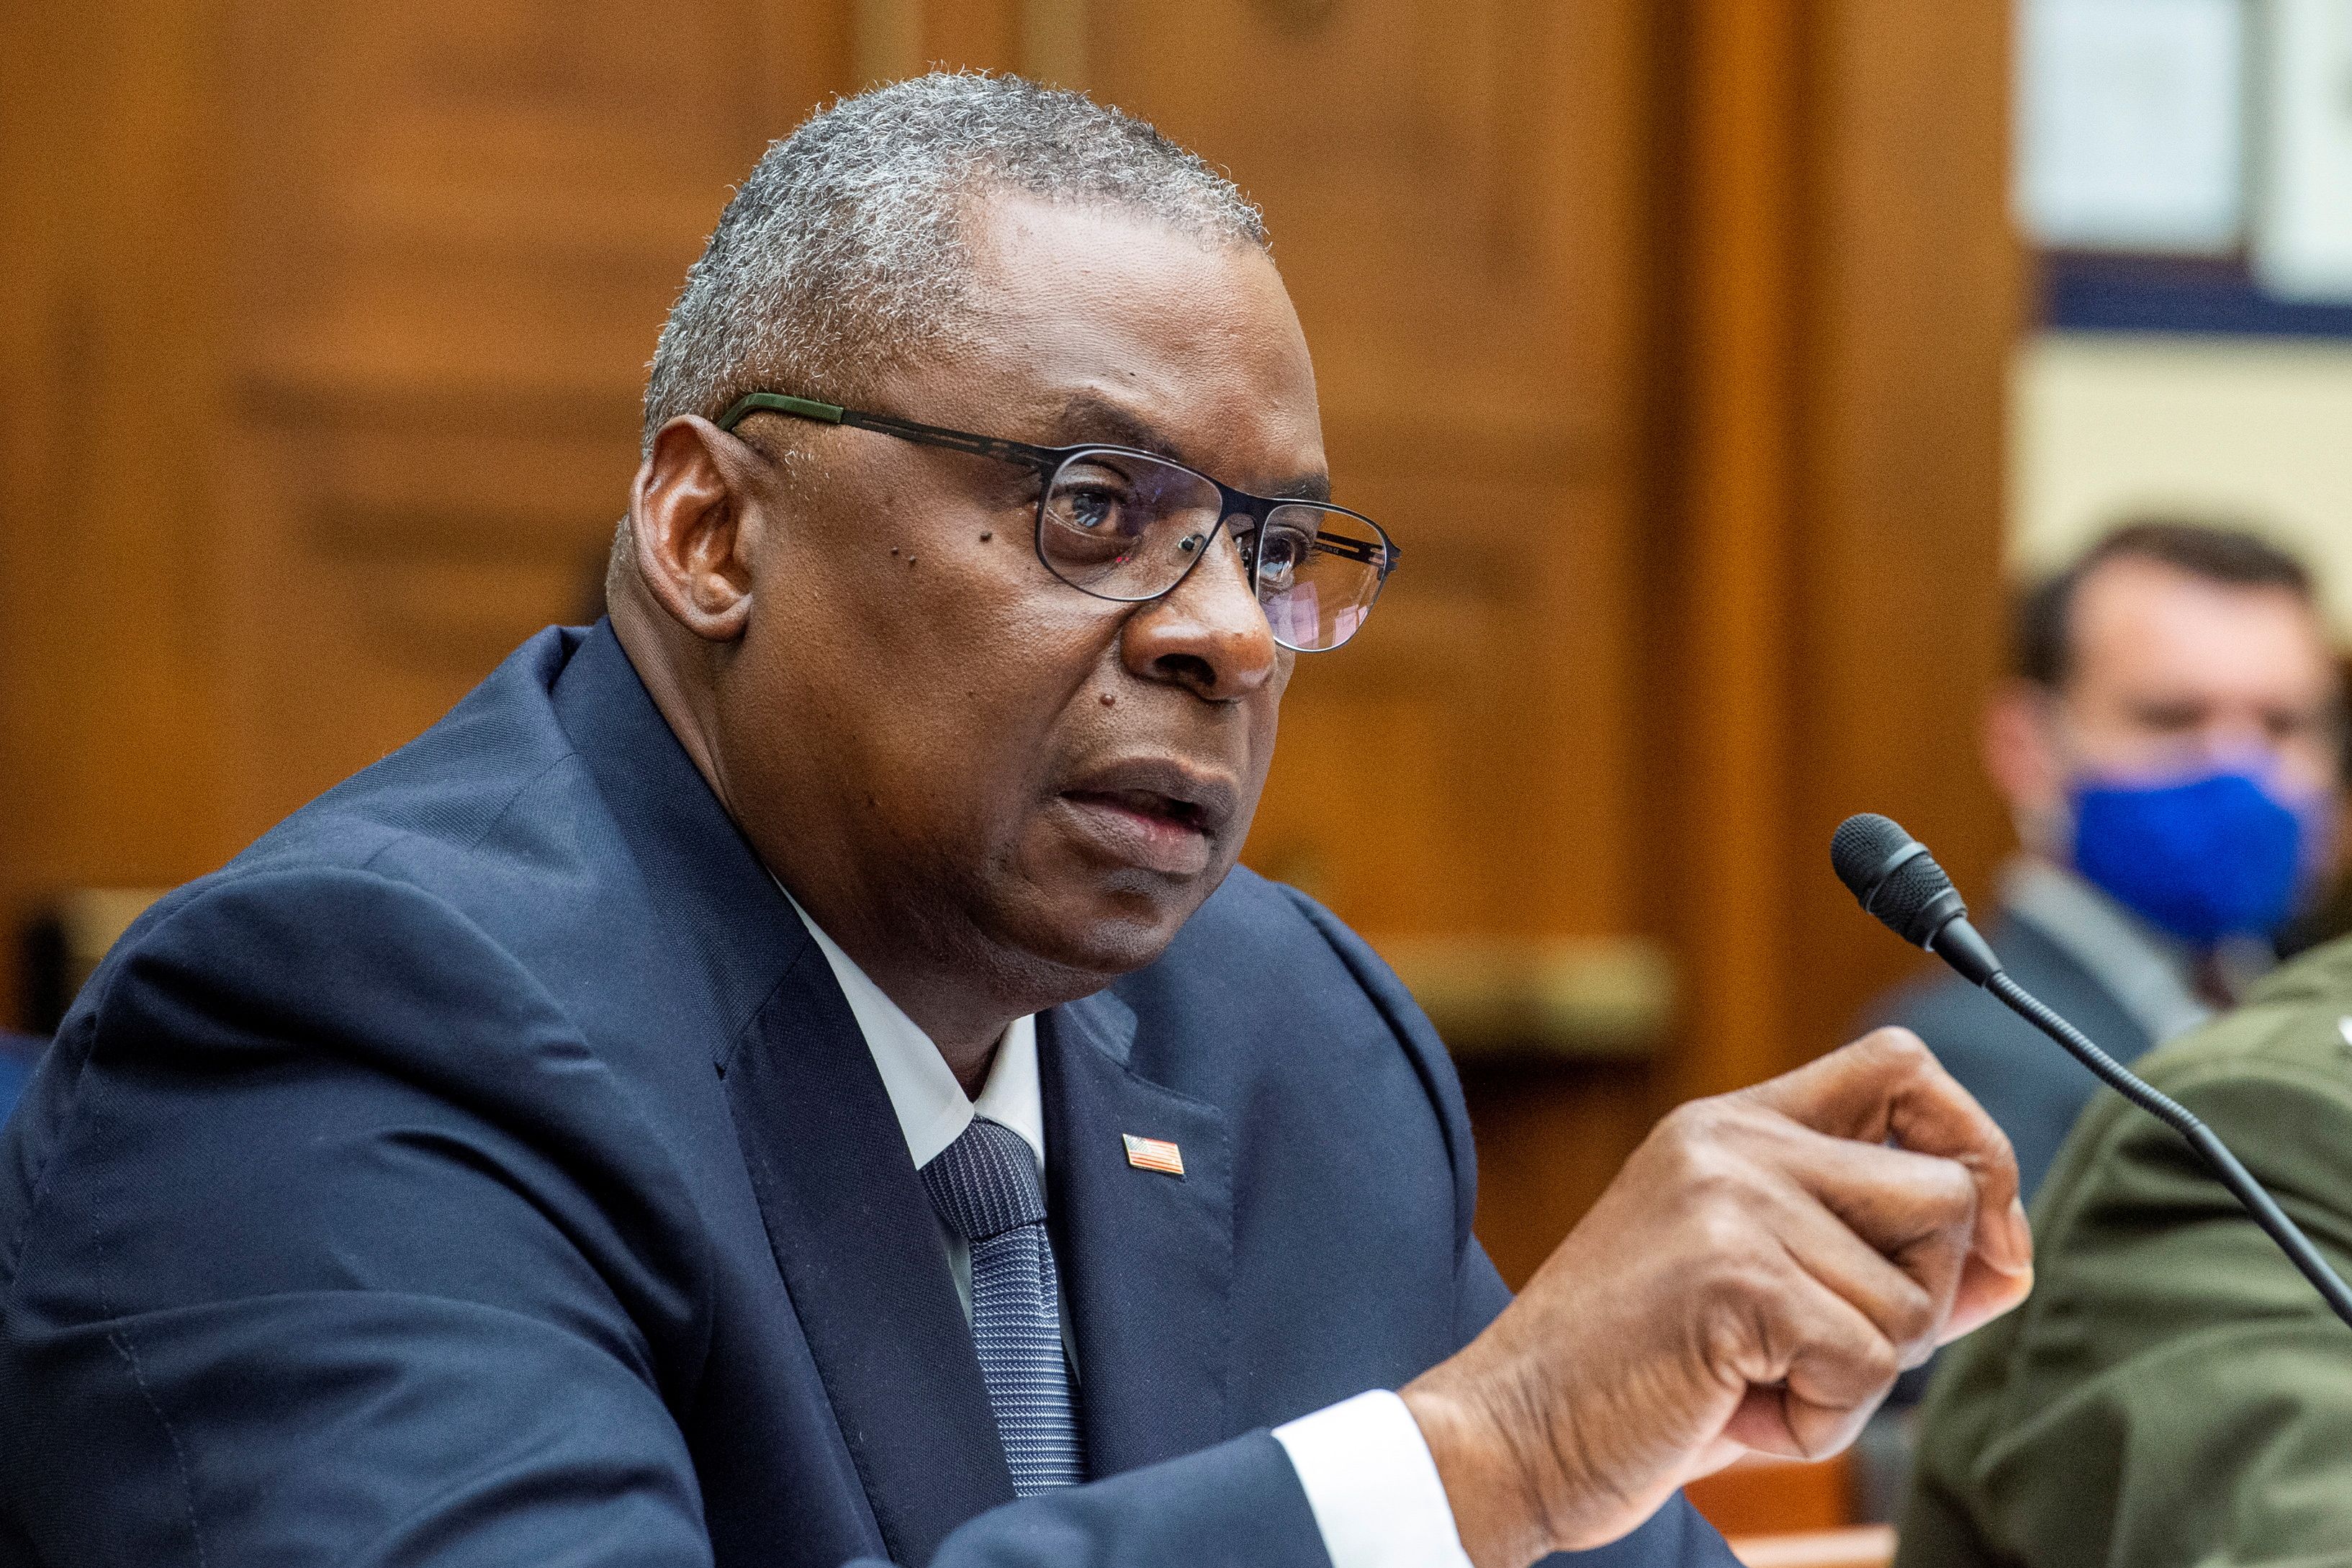 U.S. Secretary of Defense Lloyd Austin responds to questions during a House Armed Services Committee hearing on Ending the U.S. Military Mission in Afghanistan in the Rayburn House Office Building in Washington, U.S., September 29, 2021. Rod Lamkey/Pool via REUTERS